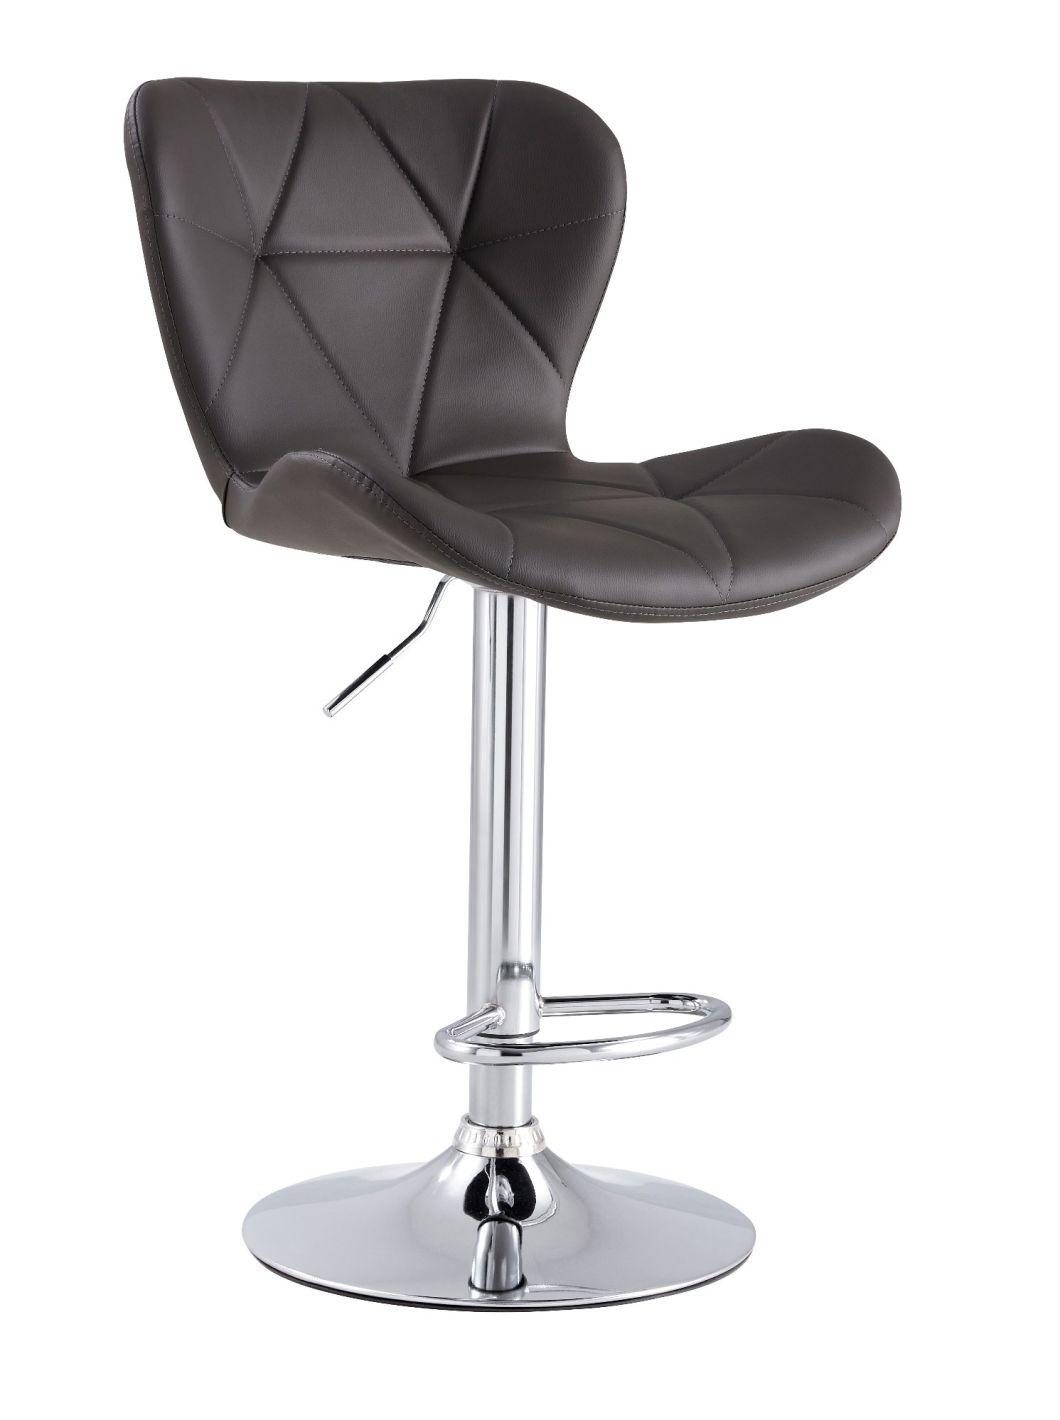 Contemporary American Style Stainless Steel Bar Chair for Indoor Use